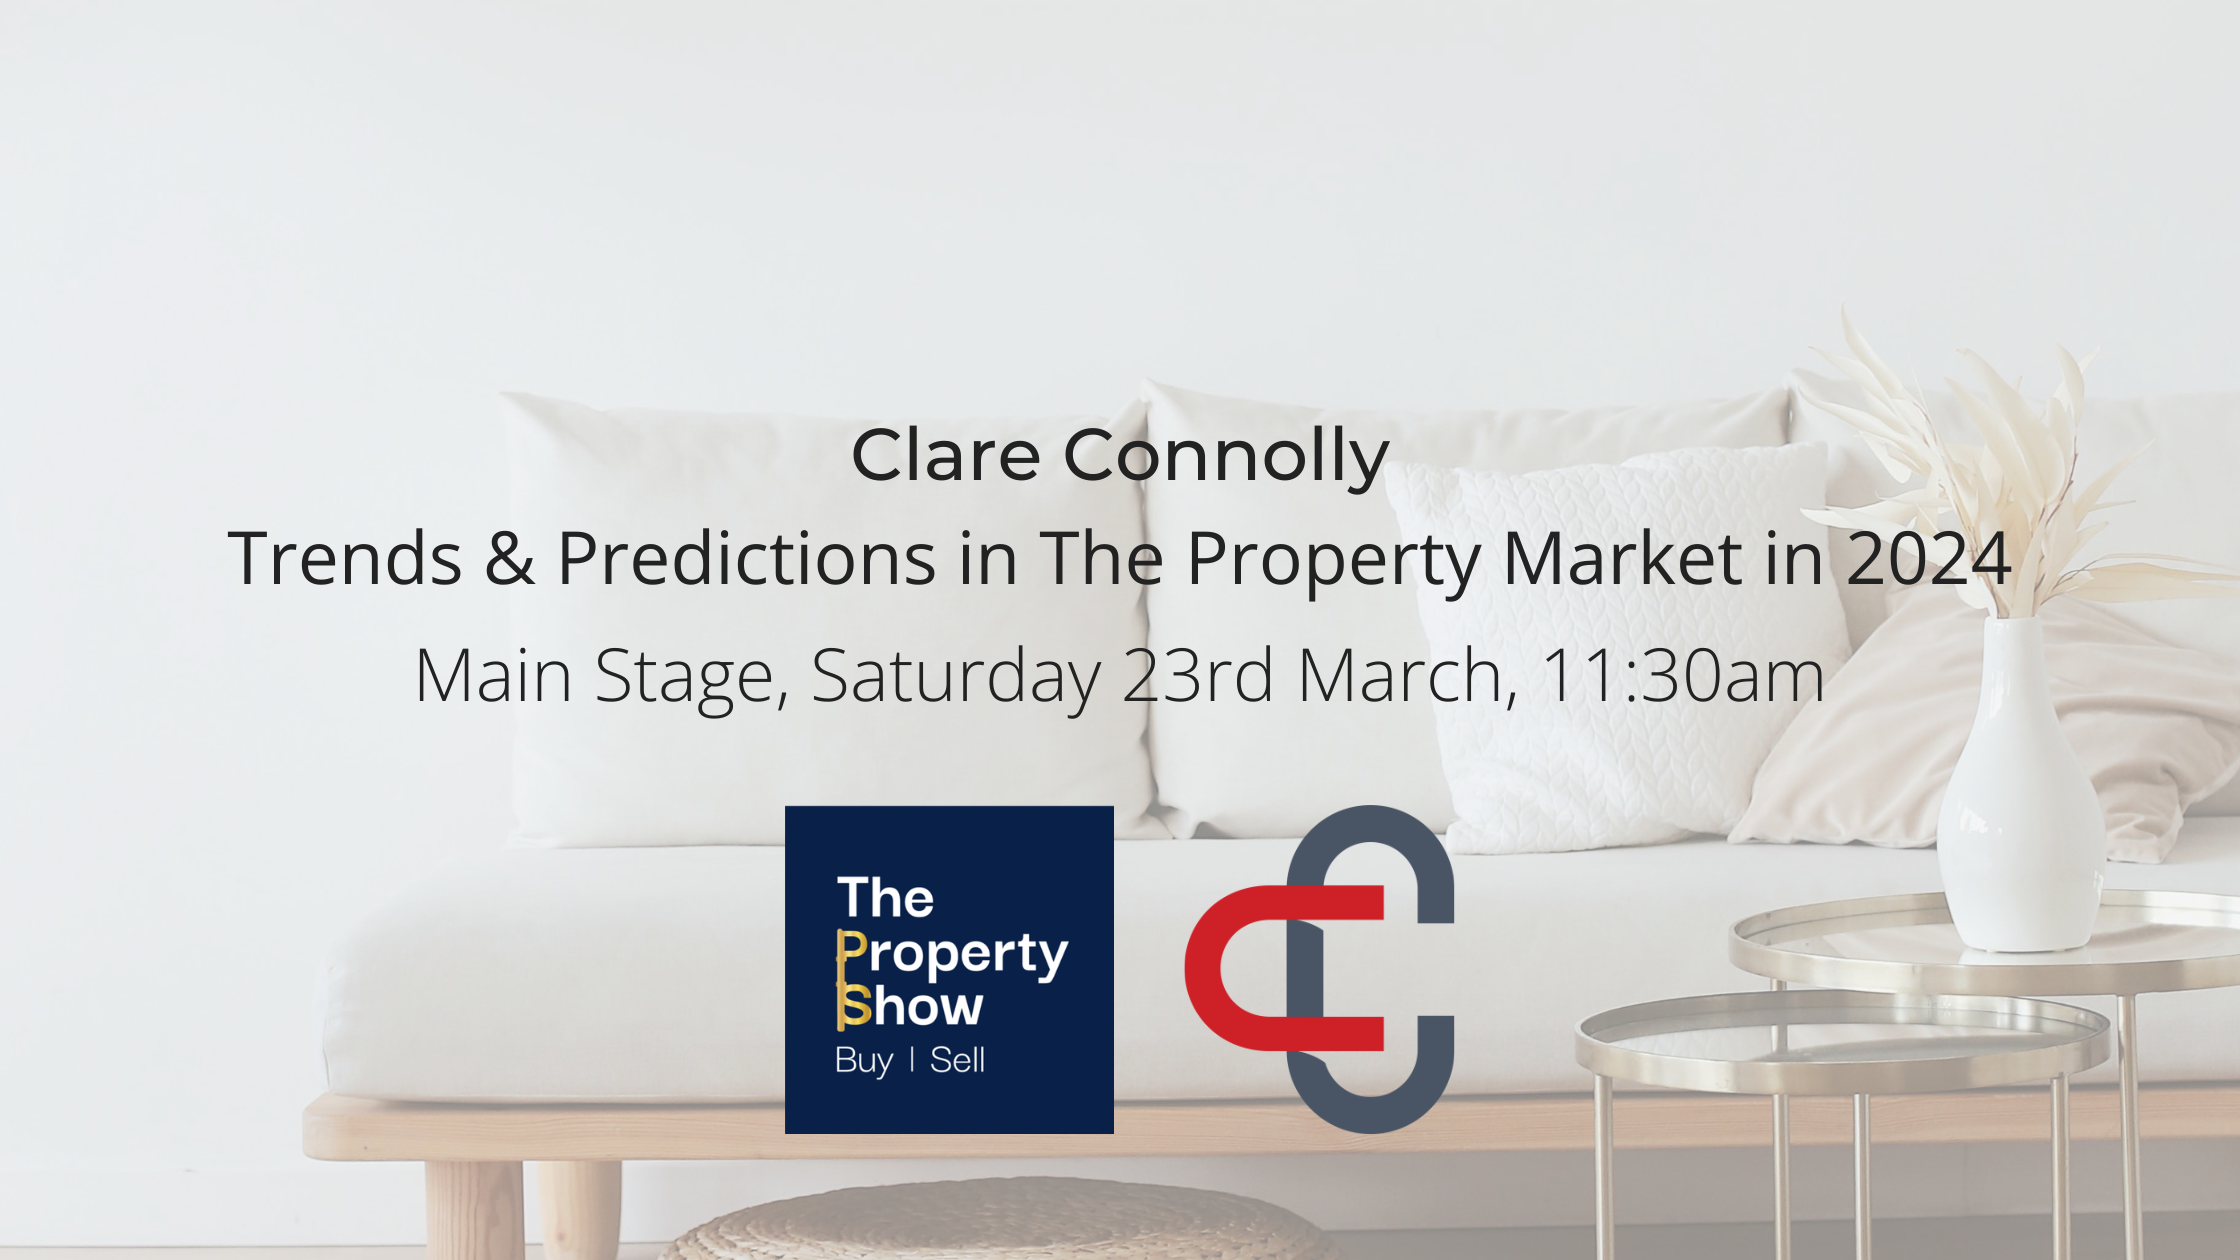 Clare Connolly at The Property Show in The RDS